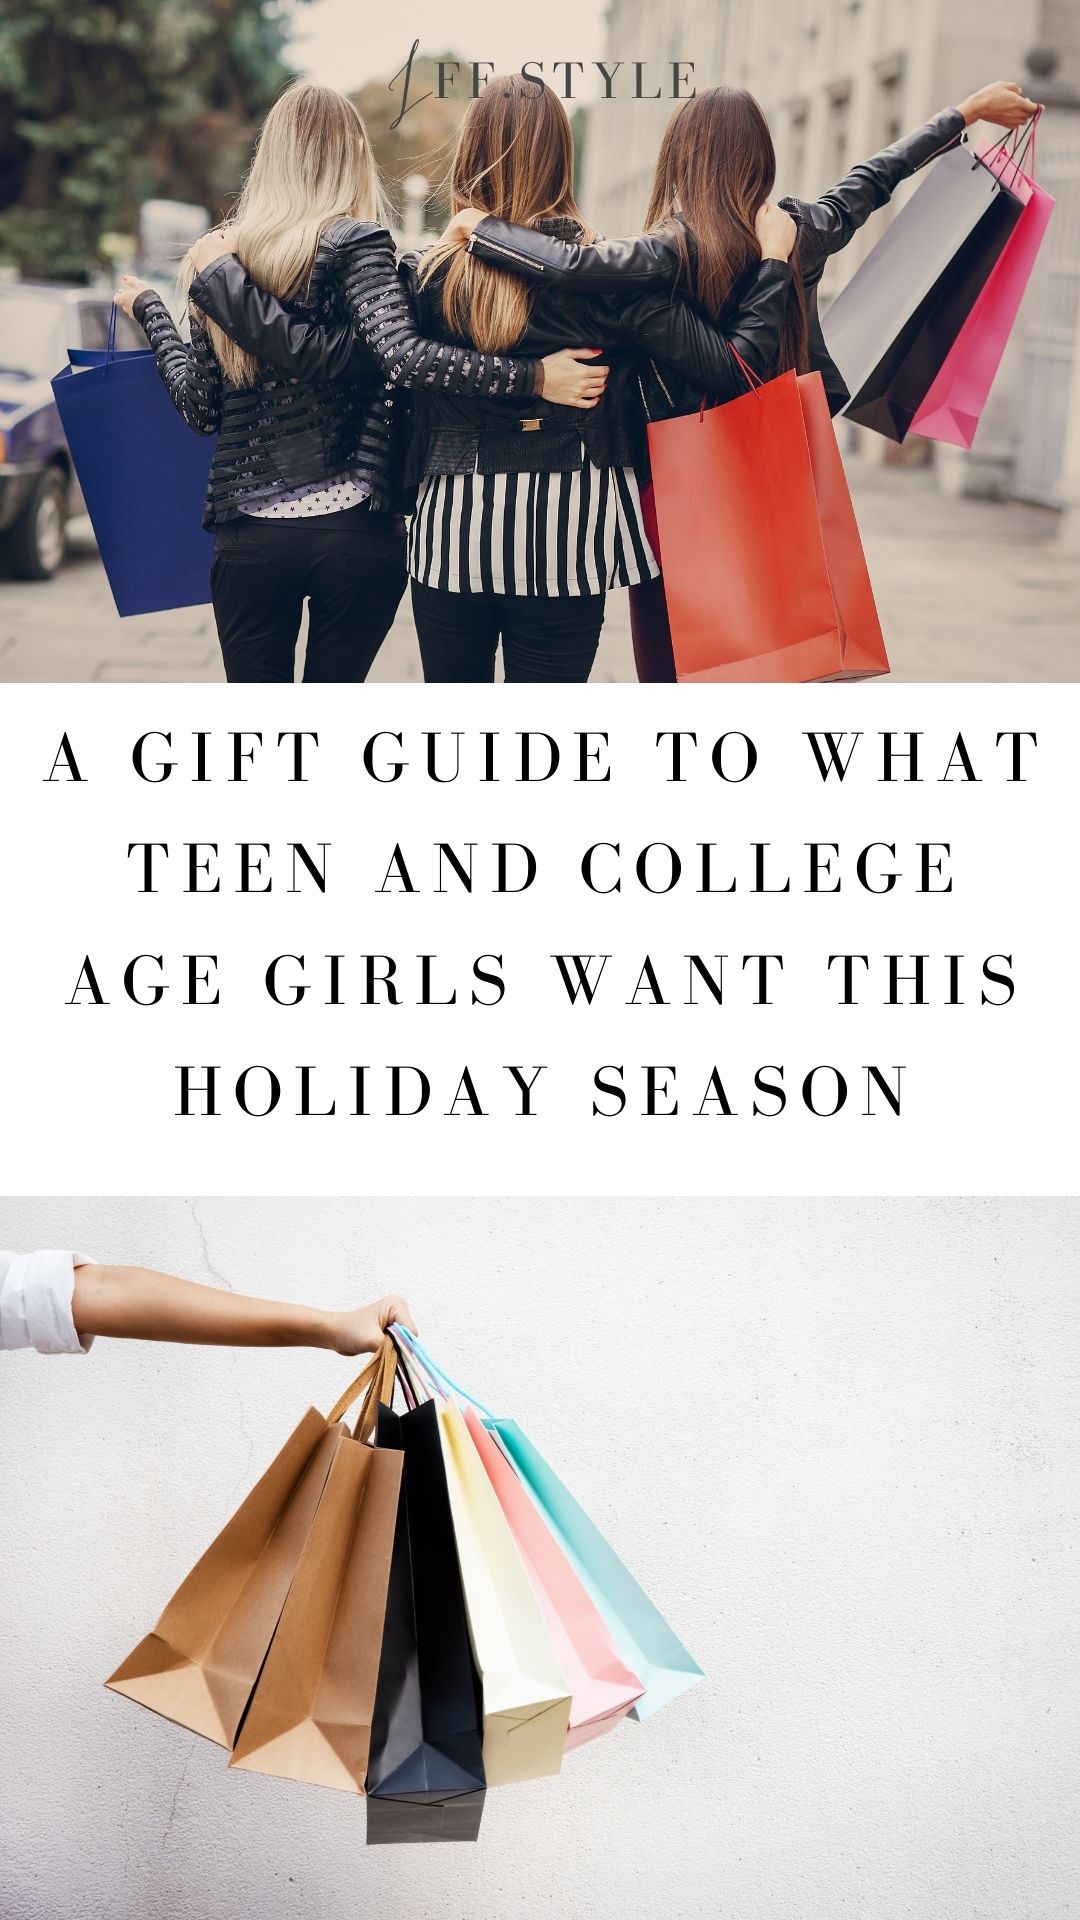 Pinterest Pine-A GIFT GUIDE TO WHAT TEEN AND COLLEGE AGE GIRLS WANT THIS HOLIDAY SEASON